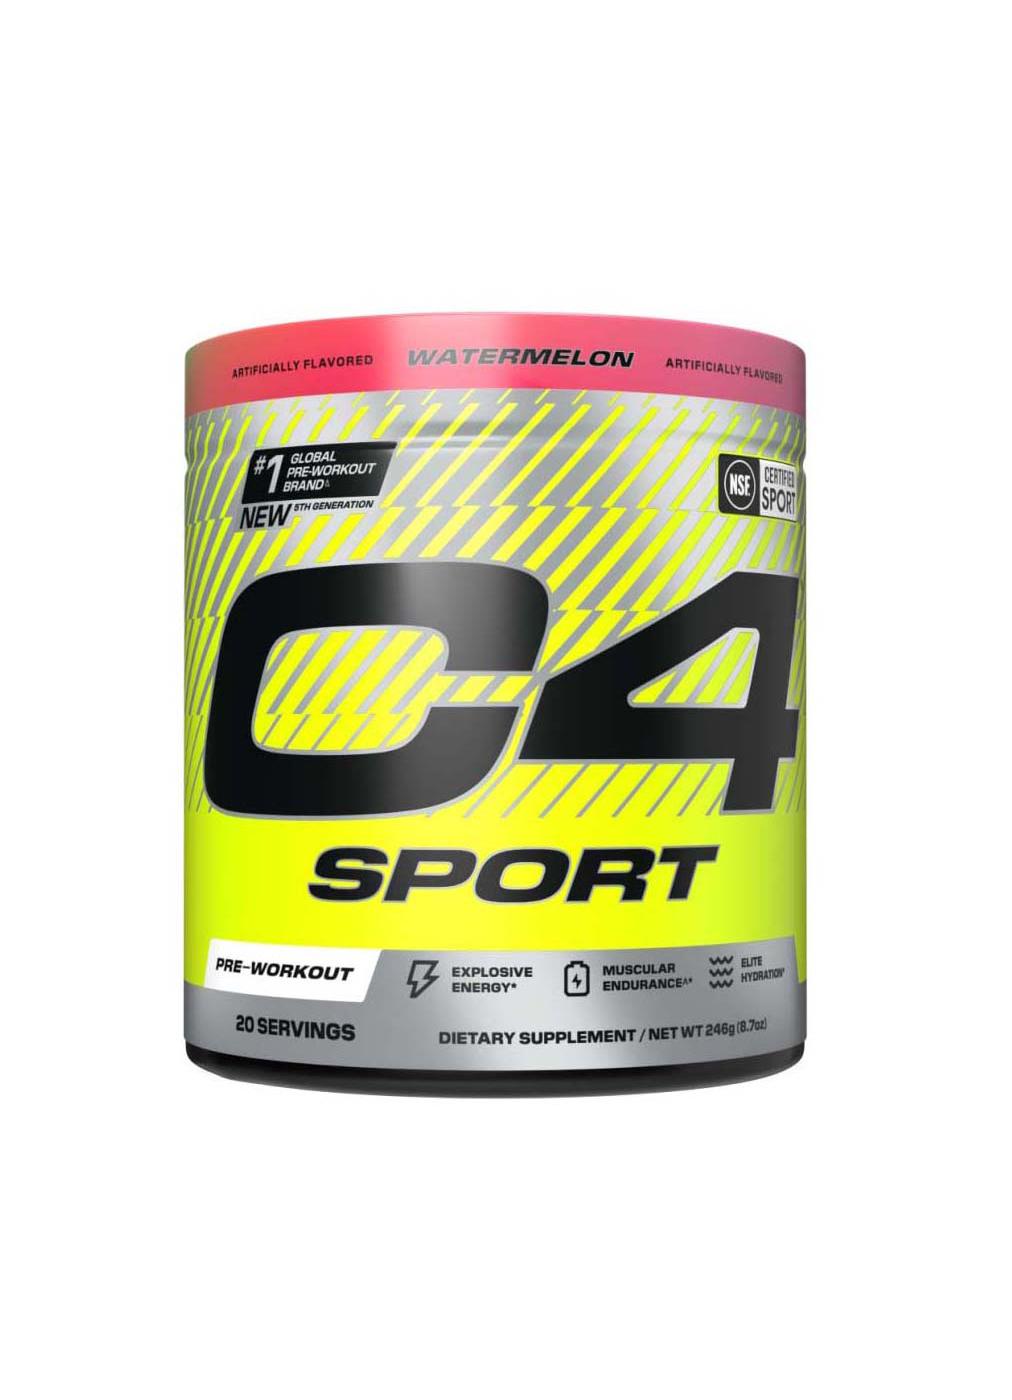 Cellucor C4 Sport Pre-Workout - Watermelon ; image 1 of 8